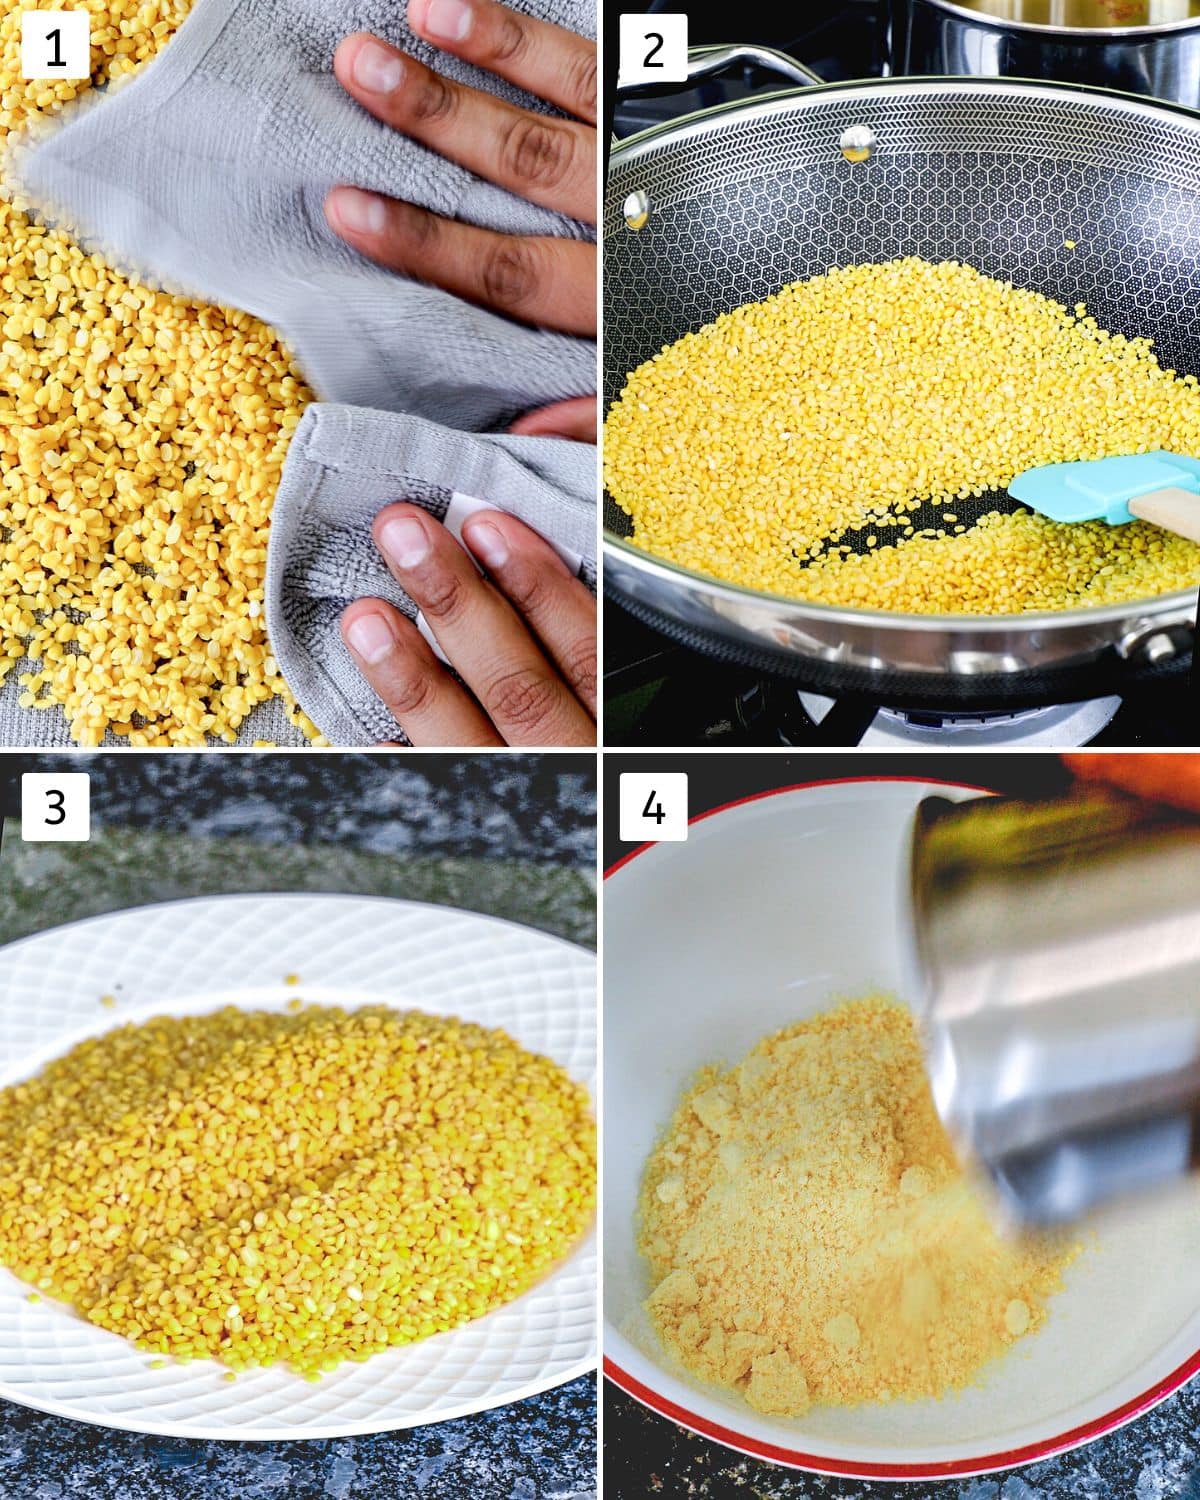 Collage of 4 images showing drying moong dal, roasting and making powder.